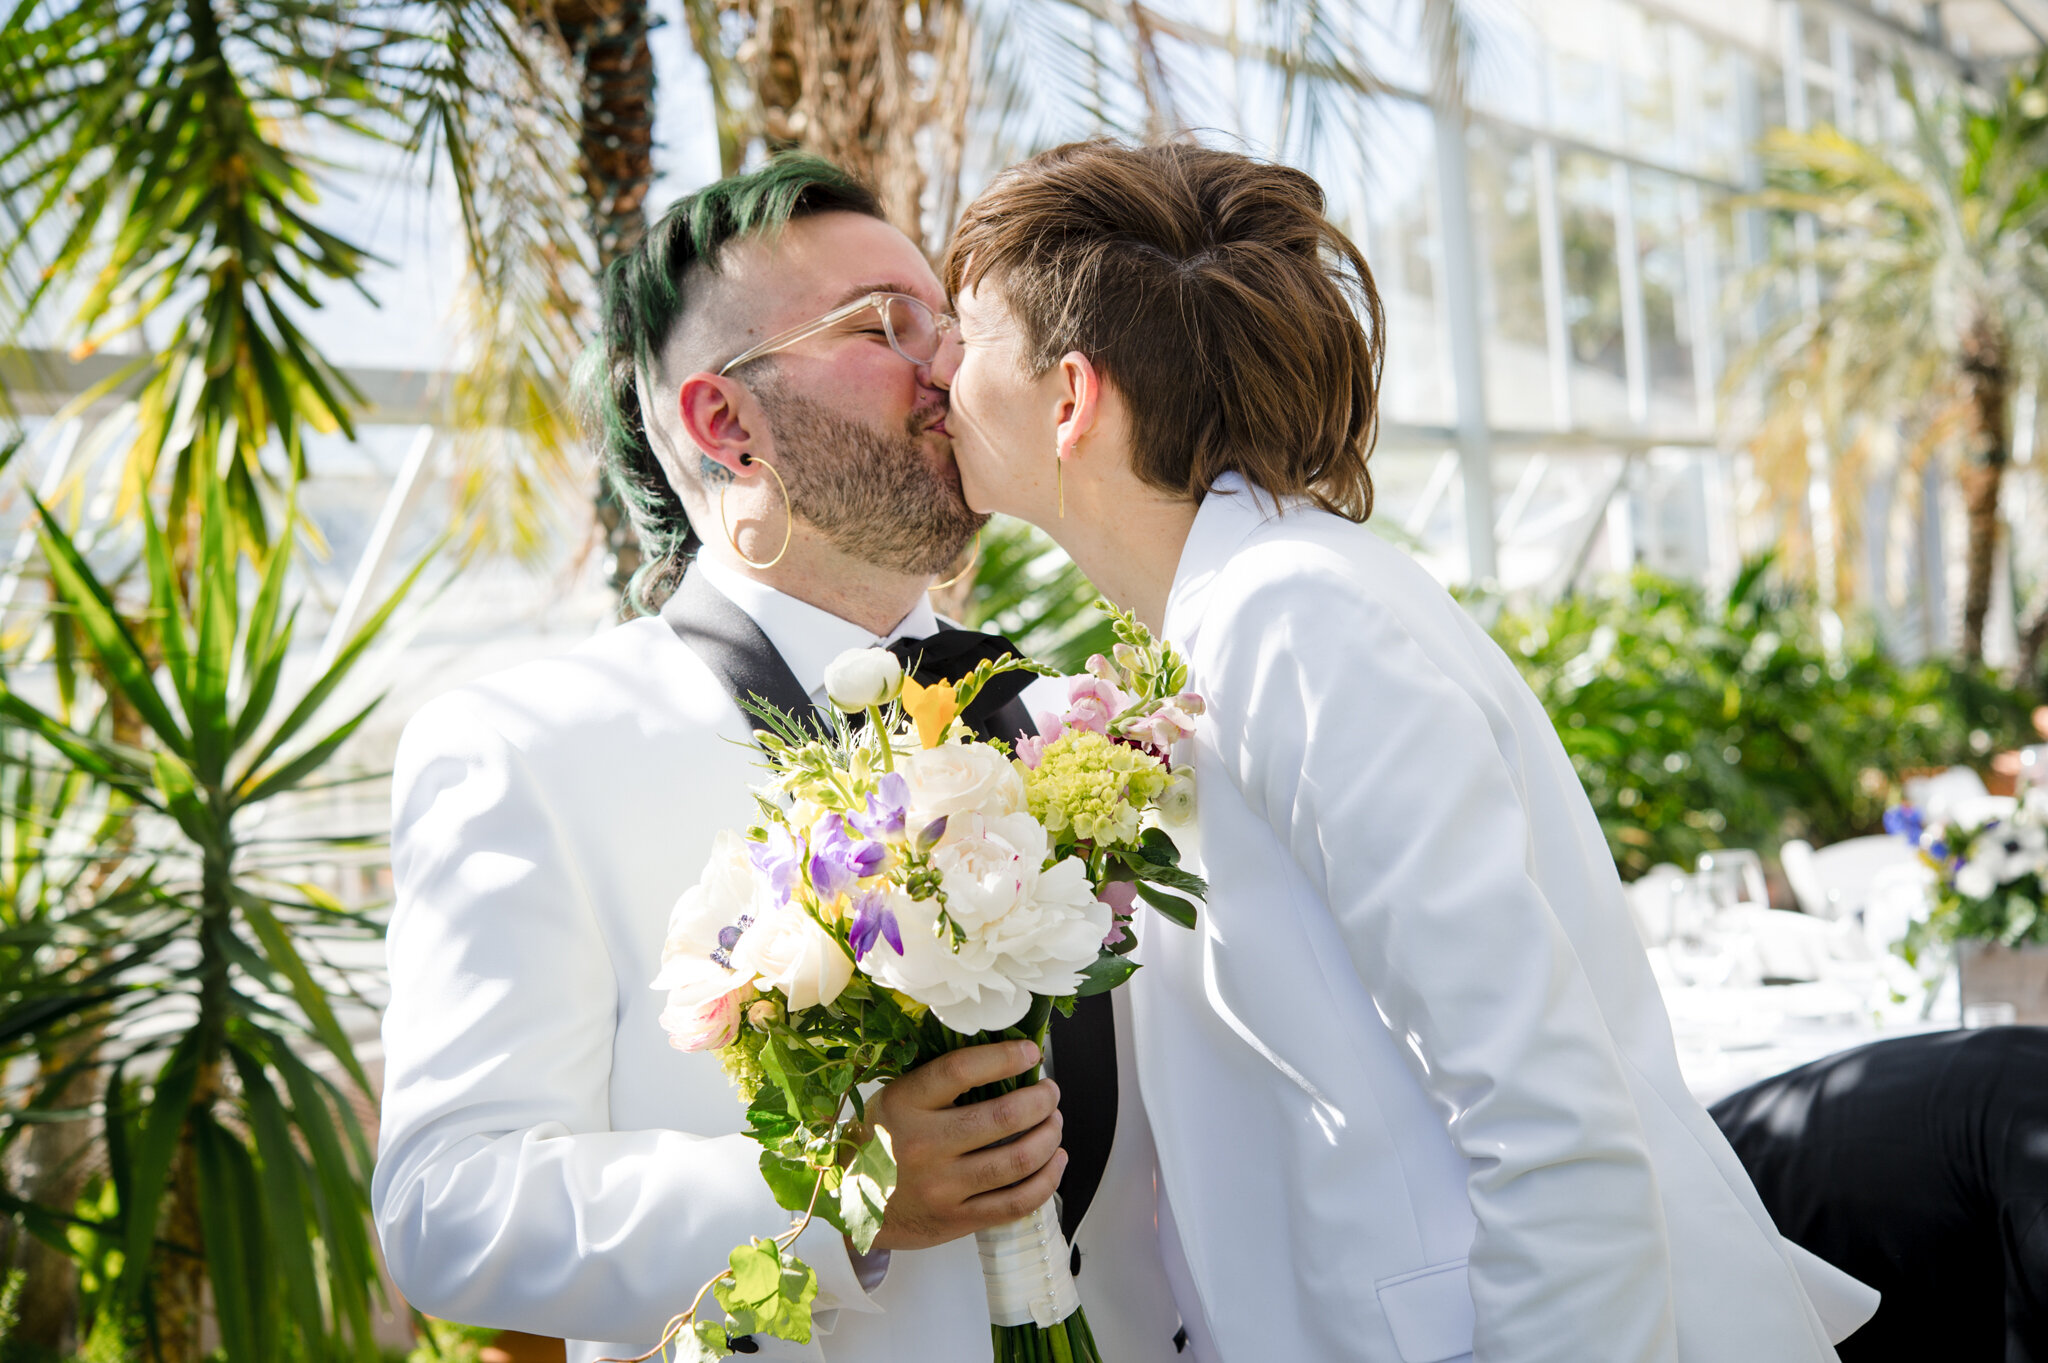 Marriers kiss while holding bouquet before ceremony at Roger Williams Botanical Center Providence Rhode Island Michelle Schapiro New England LGBTQ Couple Photographer